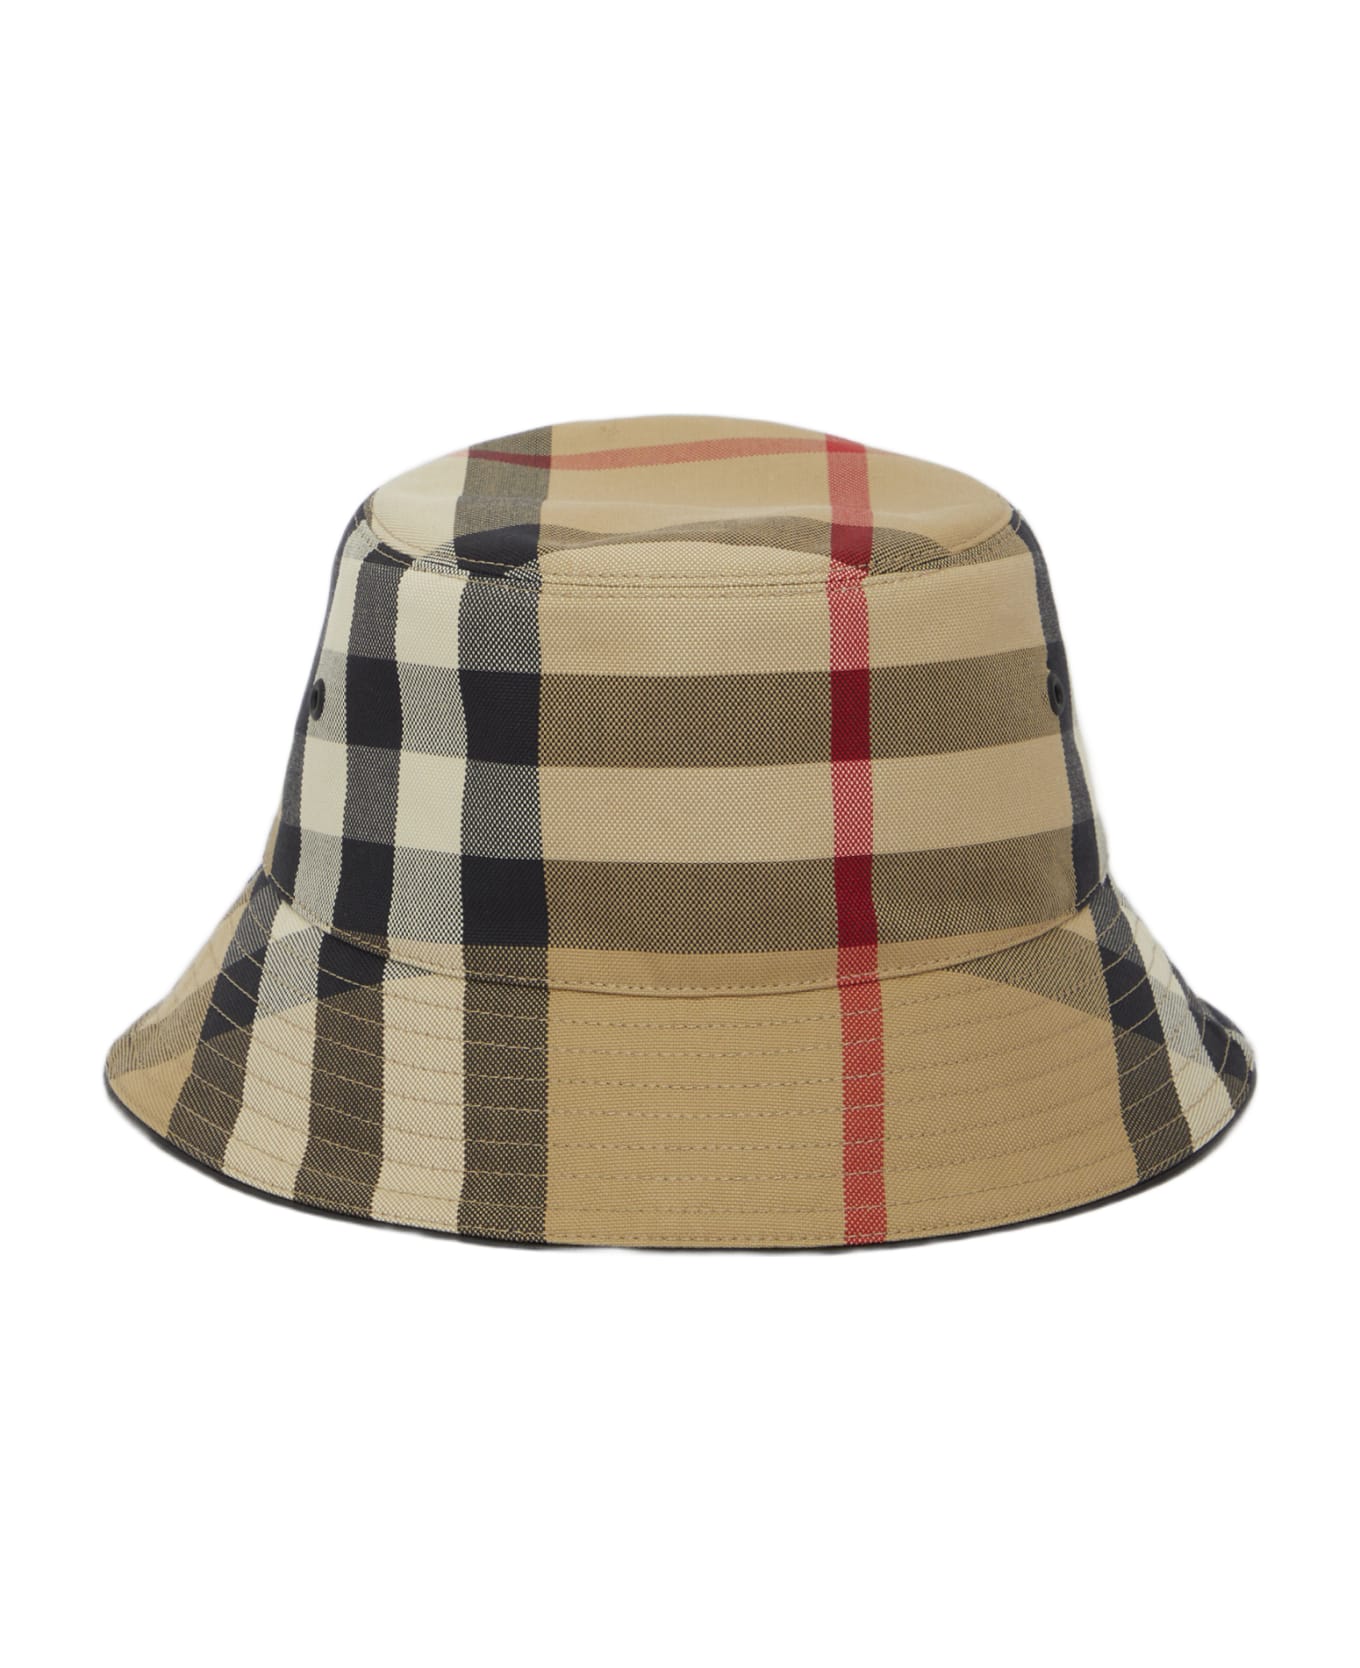 Burberry Exaggerated Check Bucket Hat - BEIGE 帽子